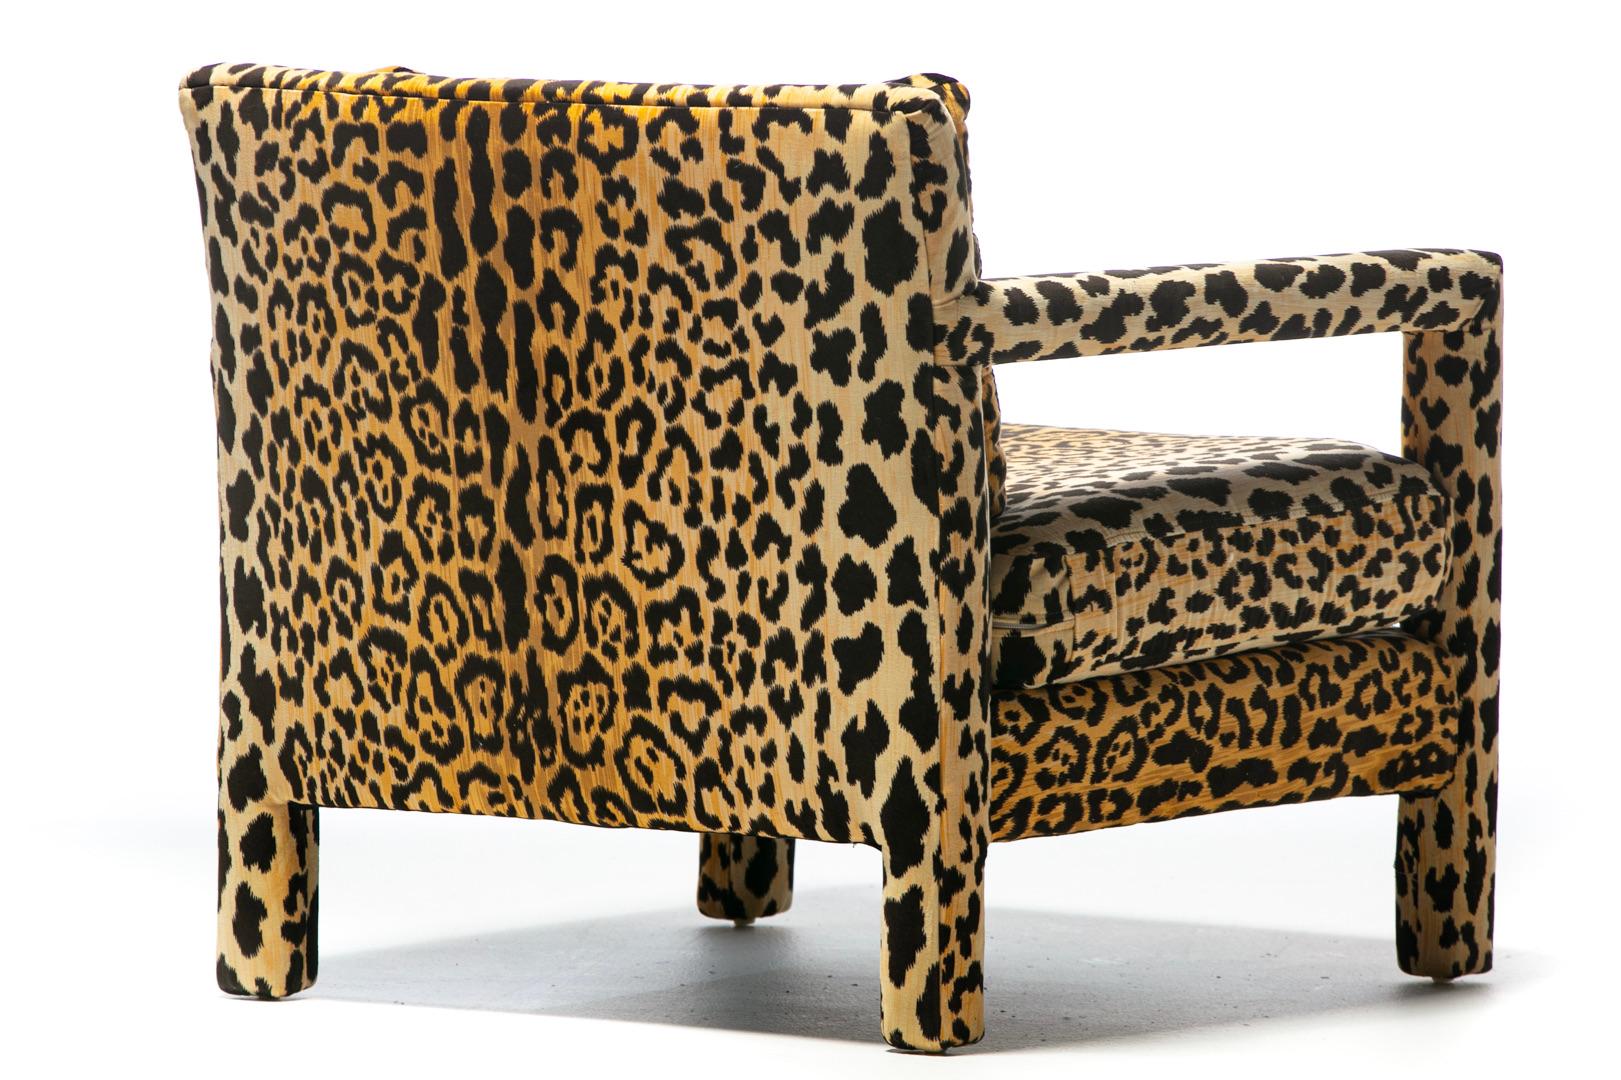 Pair of Milo Baughman Style Mid Century Parsons Chairs in Leopard Velvet c. 1970 For Sale 4